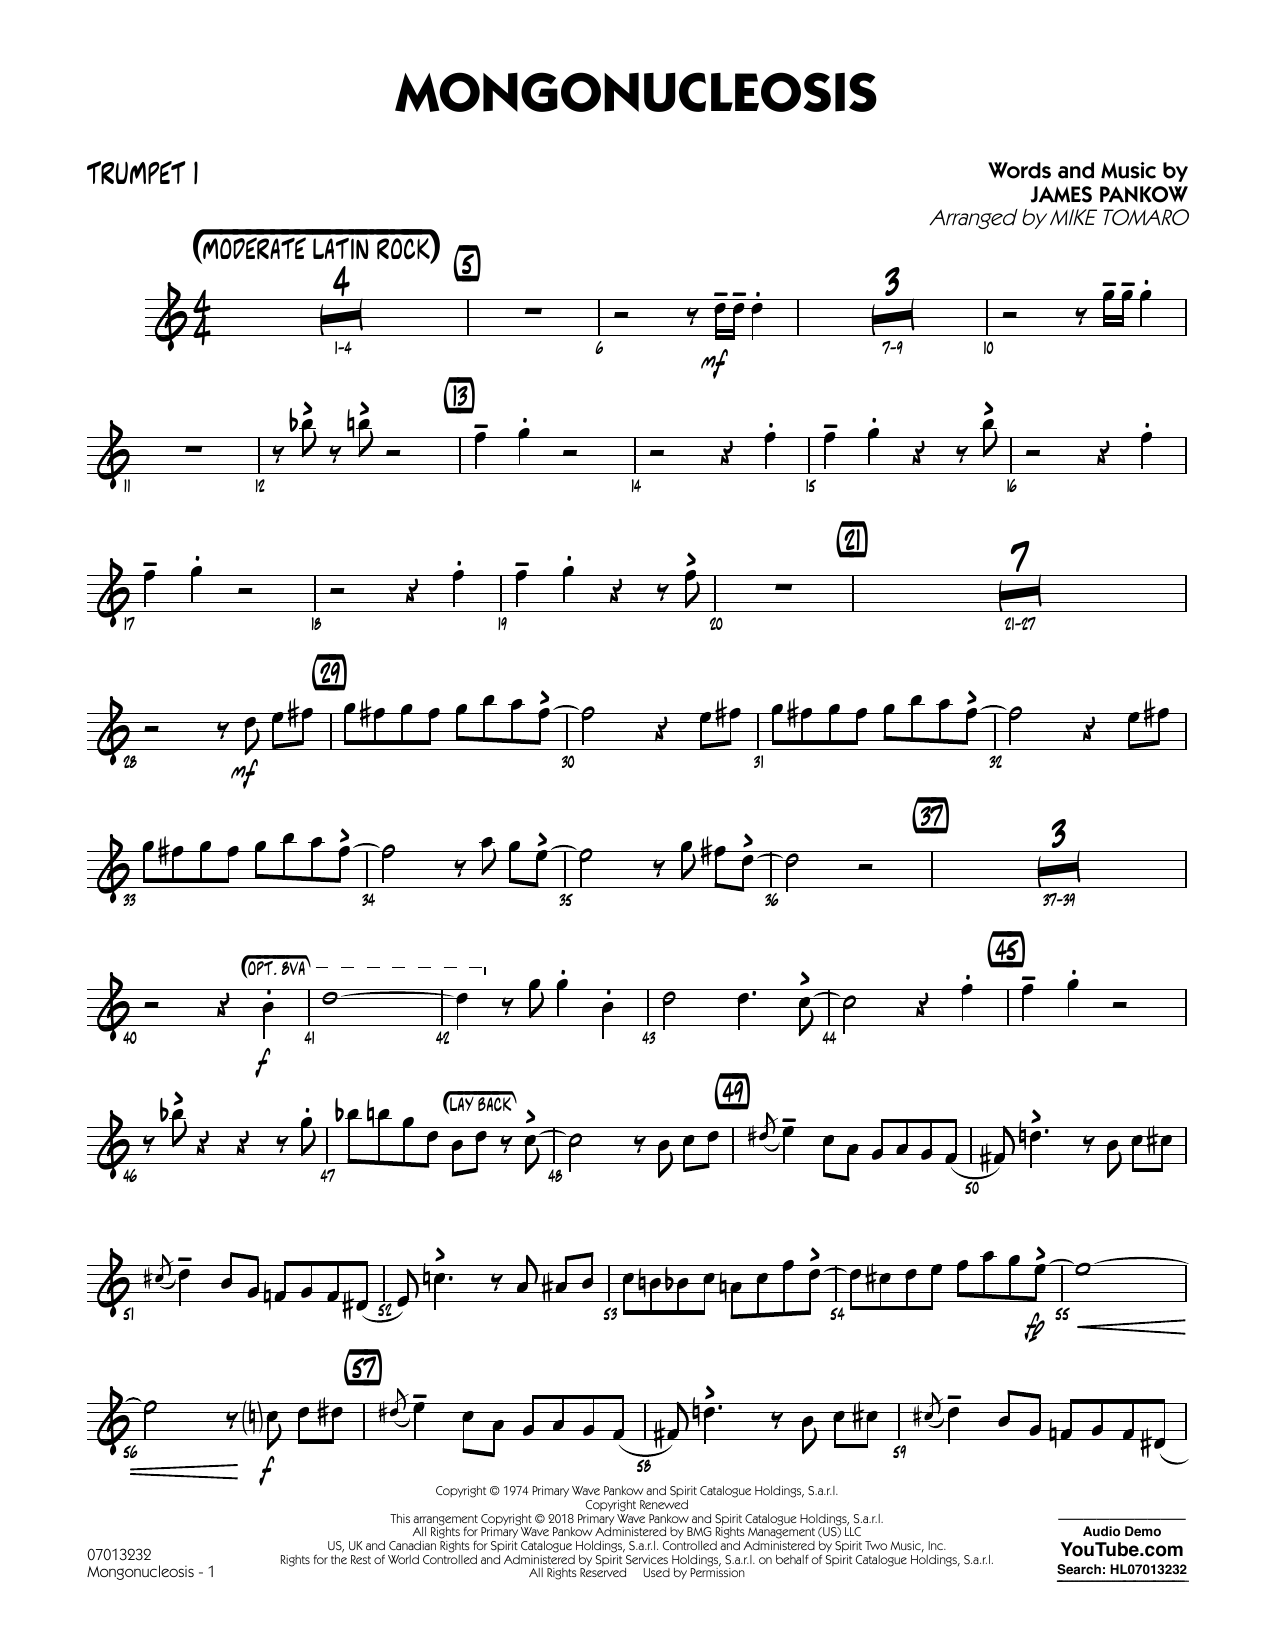 Chicago Mongonucleosis (arr. Mike Tomaro) - Trumpet 1 sheet music preview music notes and score for Jazz Ensemble including 2 page(s)